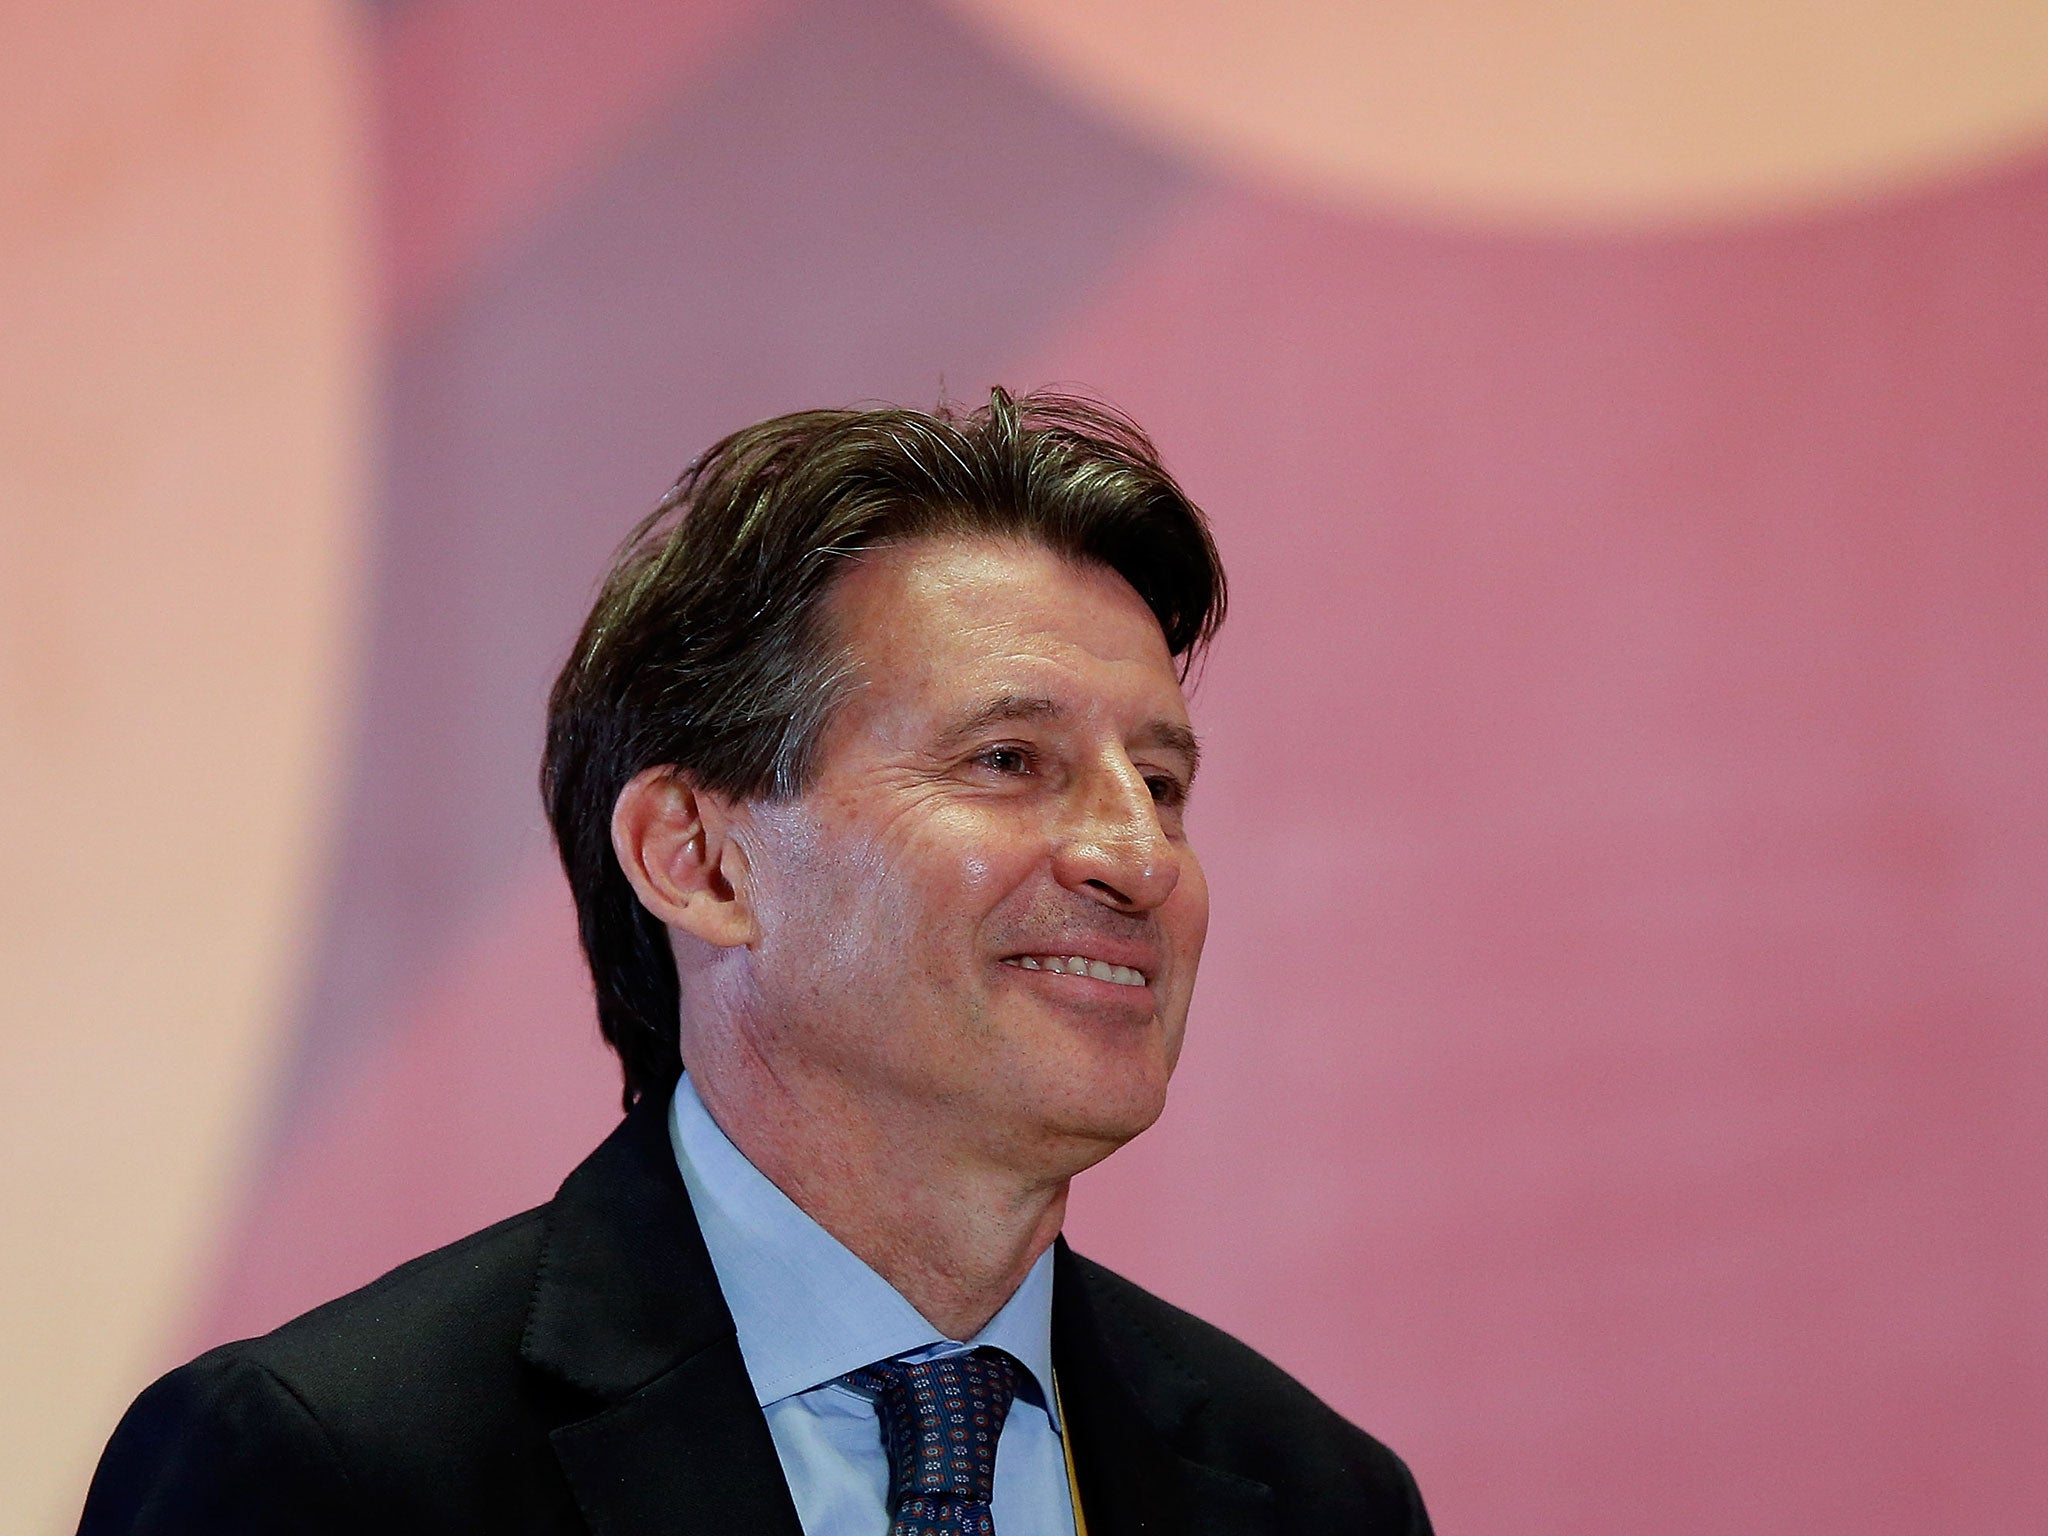 Lord Coe has conceded he’ll need to make ‘adjustments’ after becoming new IAAF chief